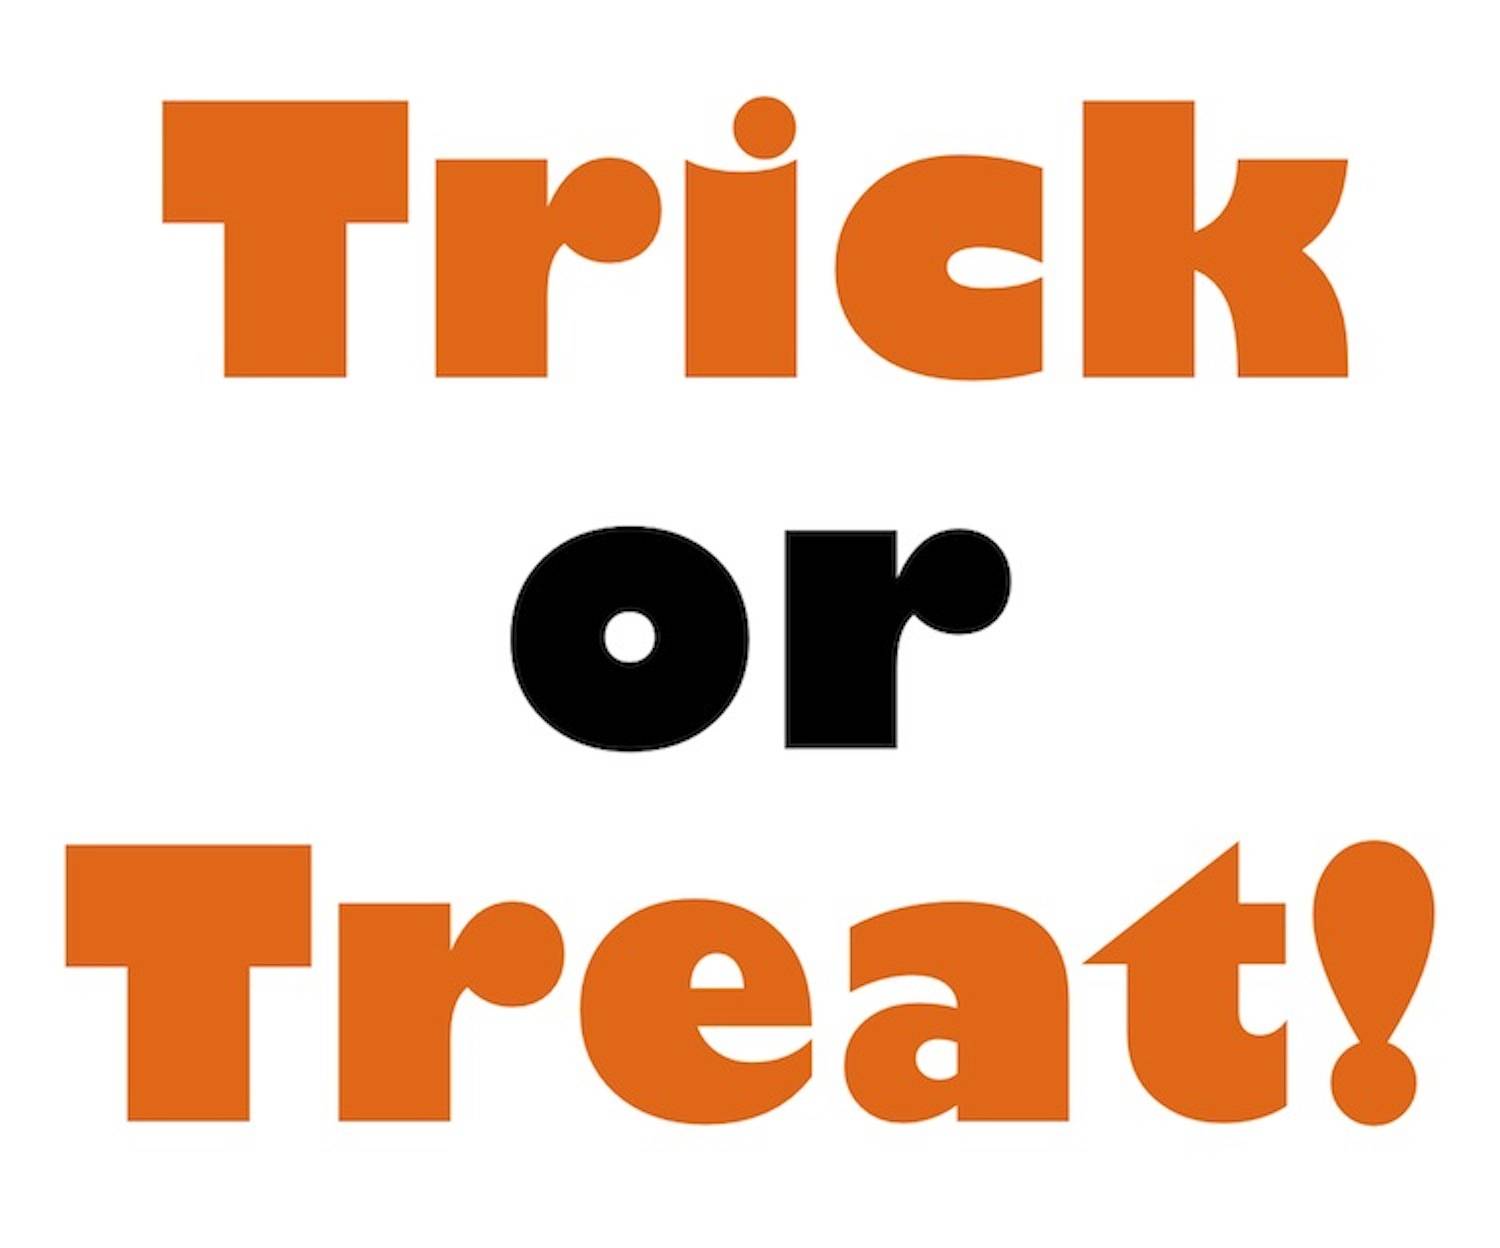 halloween signs clipart - photo #41